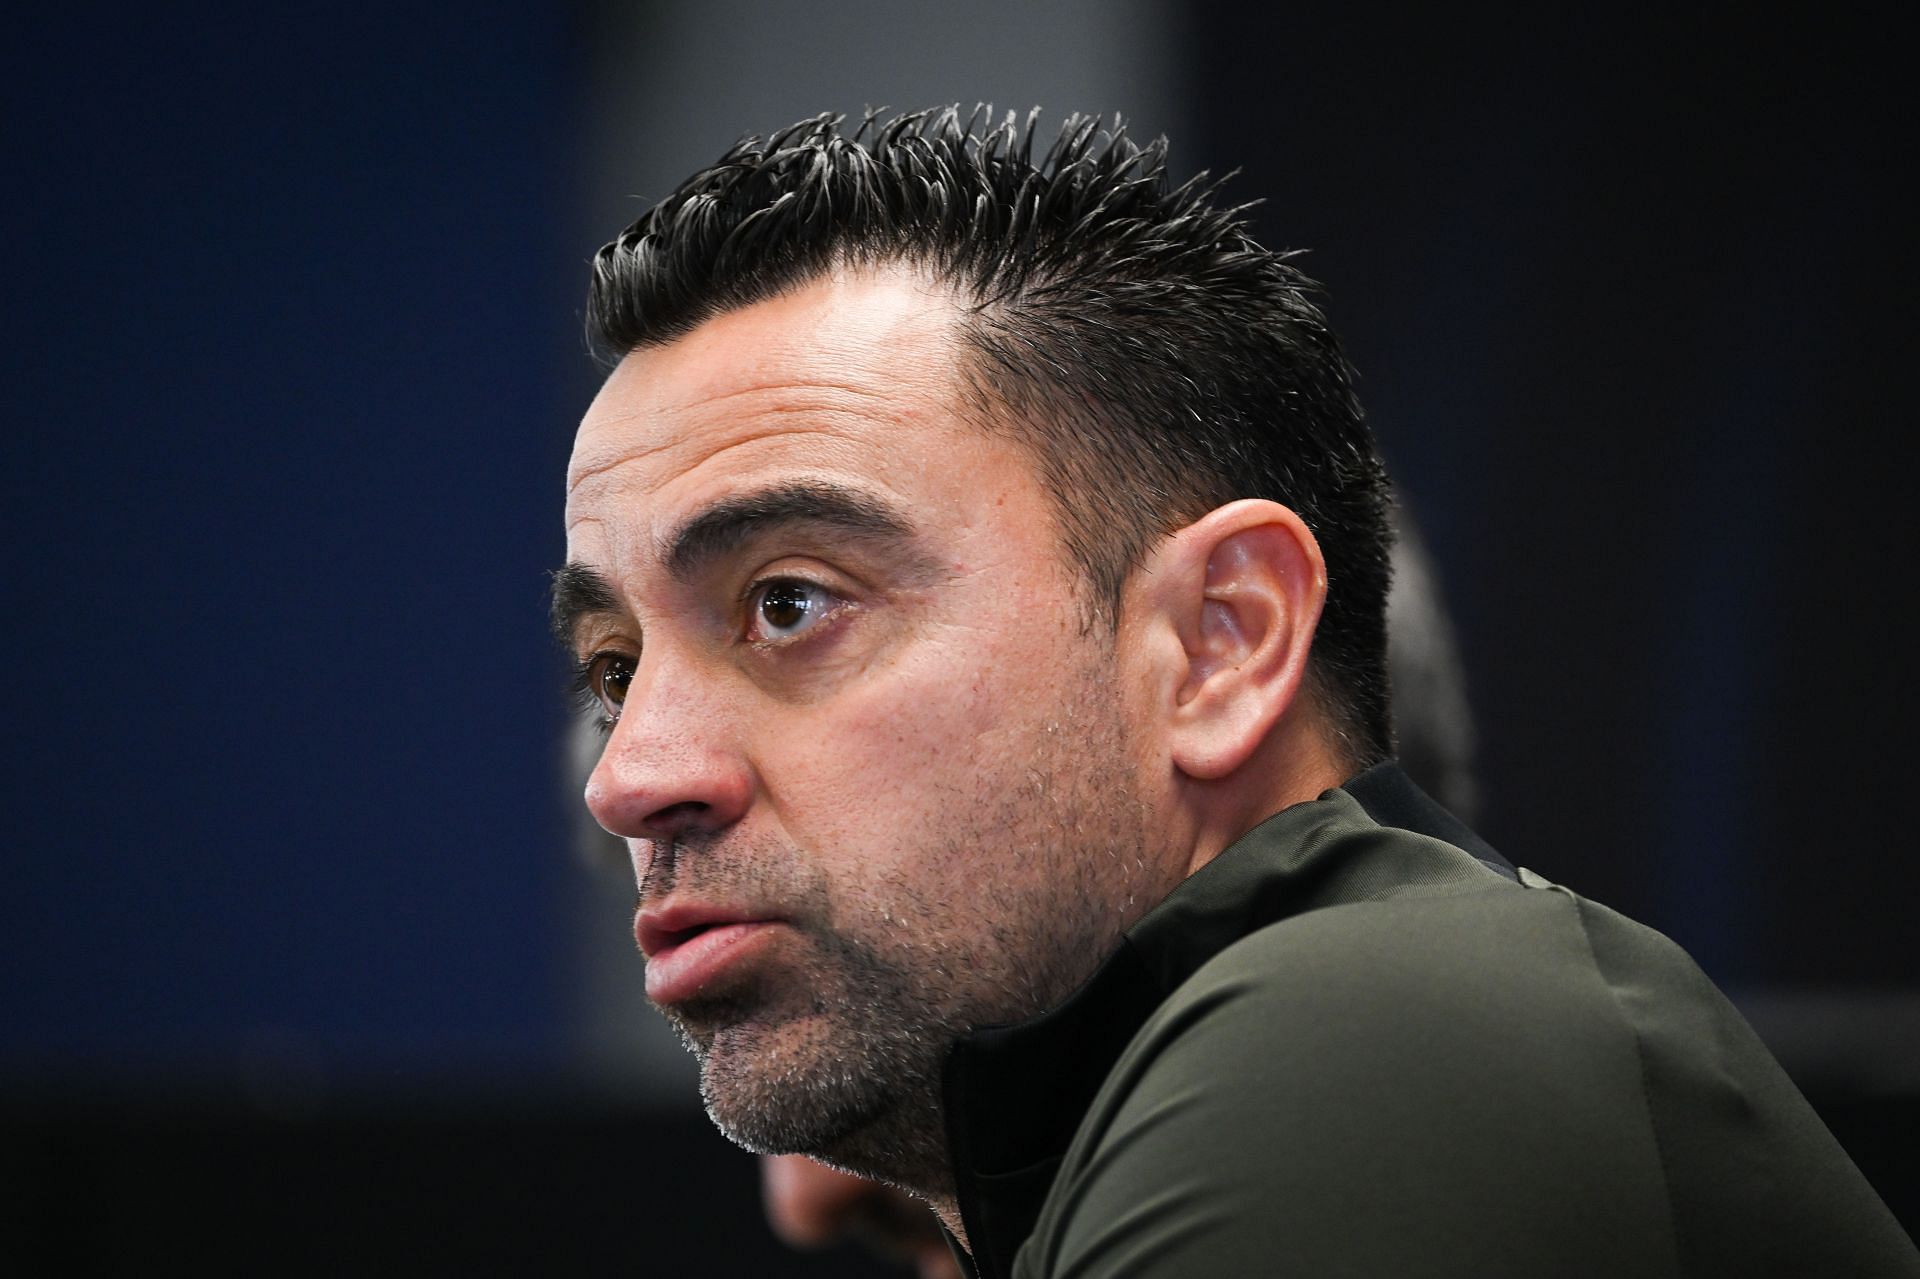 Barcelona Transfer News Roundup: Xavi set to stay, Catalans eyeing Pepelu, and more - April 25, 2024